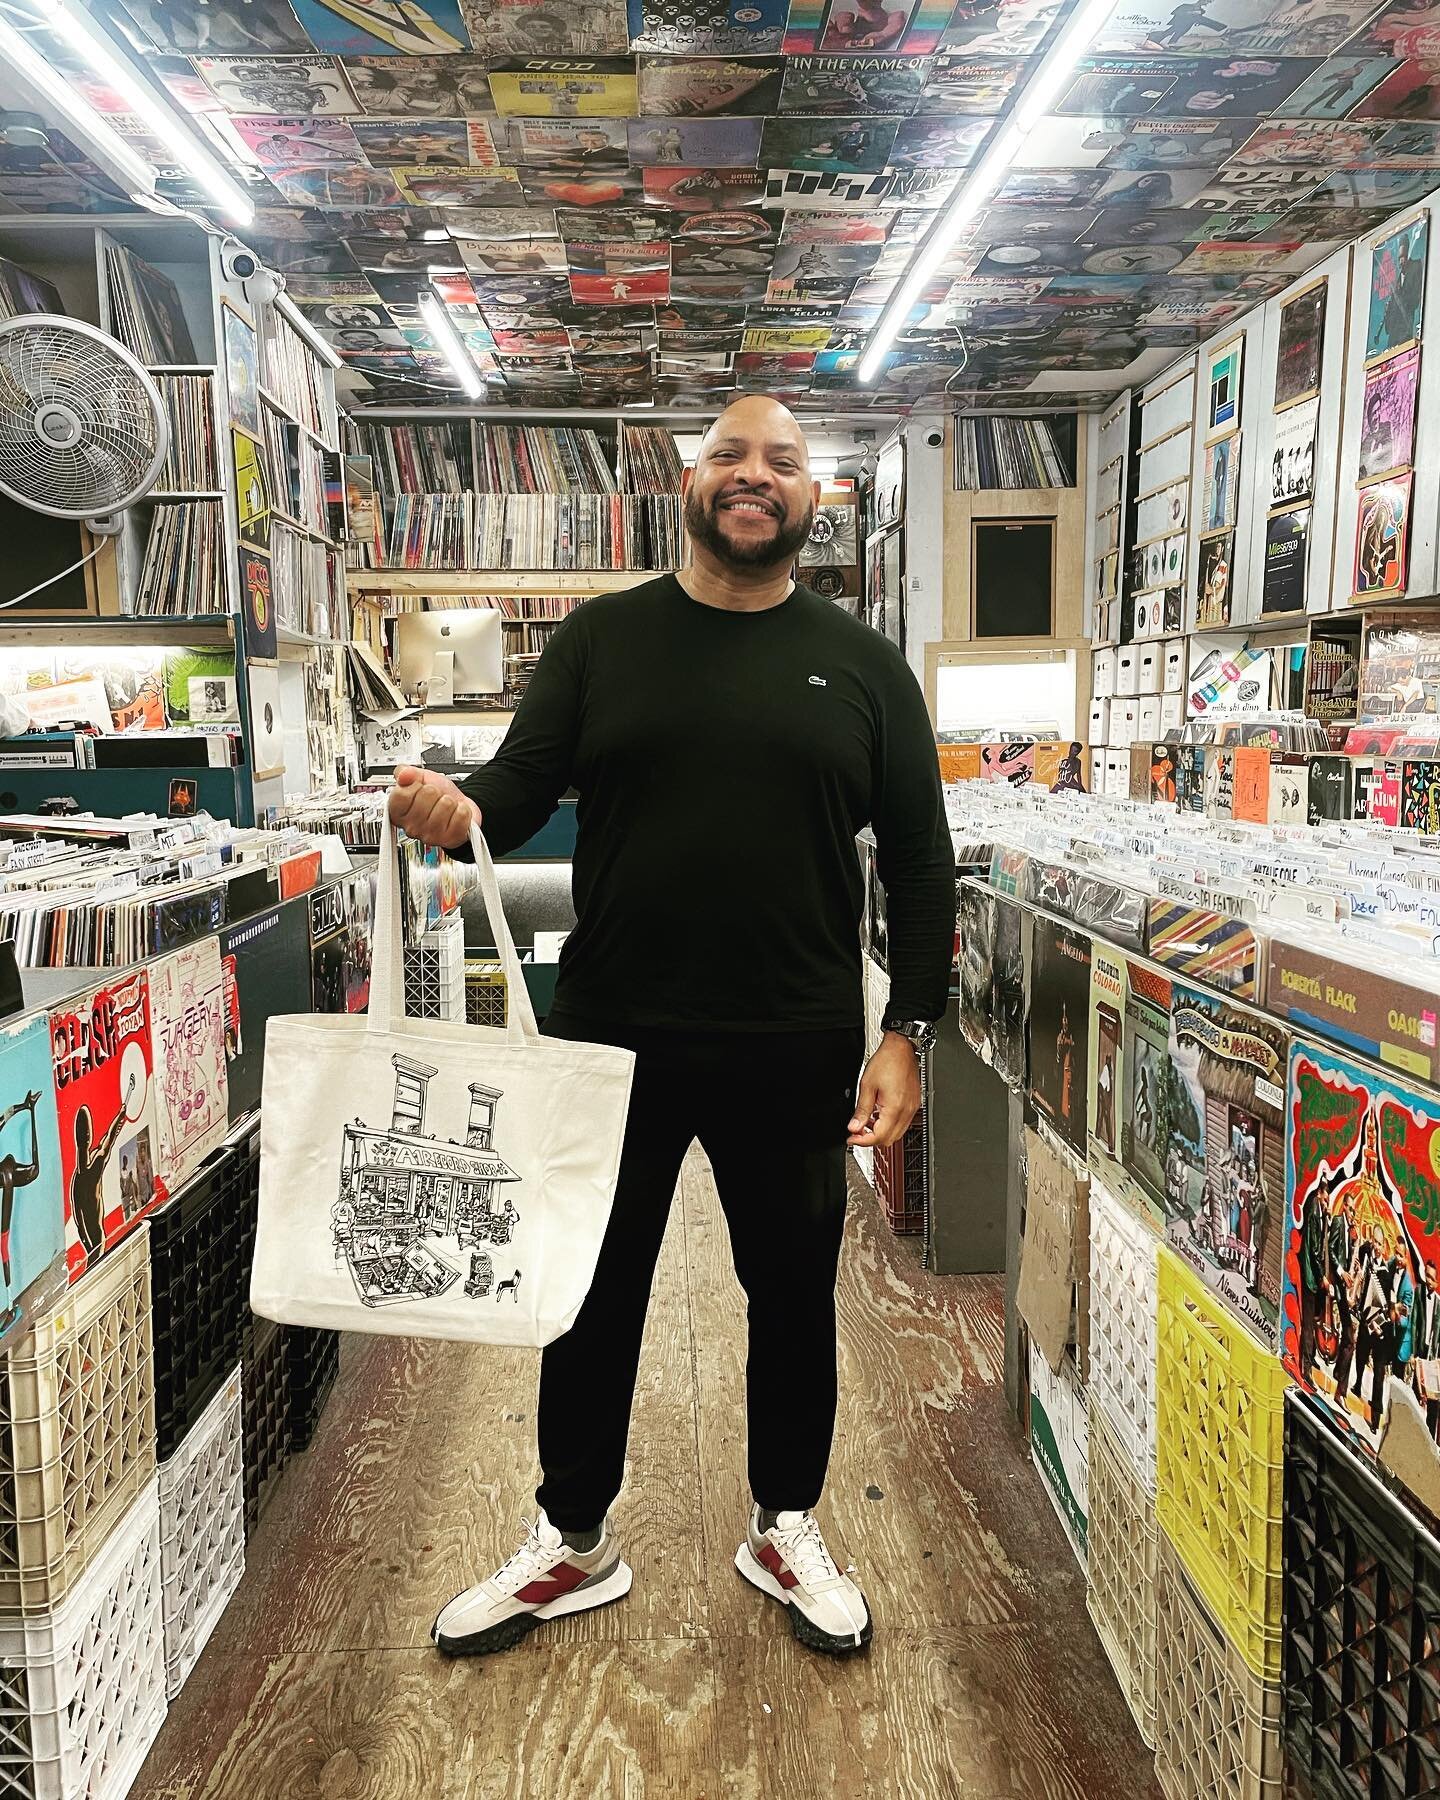 Honored to have  @clubshelternyc drop by on this rainy afternoon. Merlin Bobb is a legendary DJ/producer,  genuine &ldquo;record man&rdquo; responsible for launching many music careers and executive producing classic club records. His extensive resum